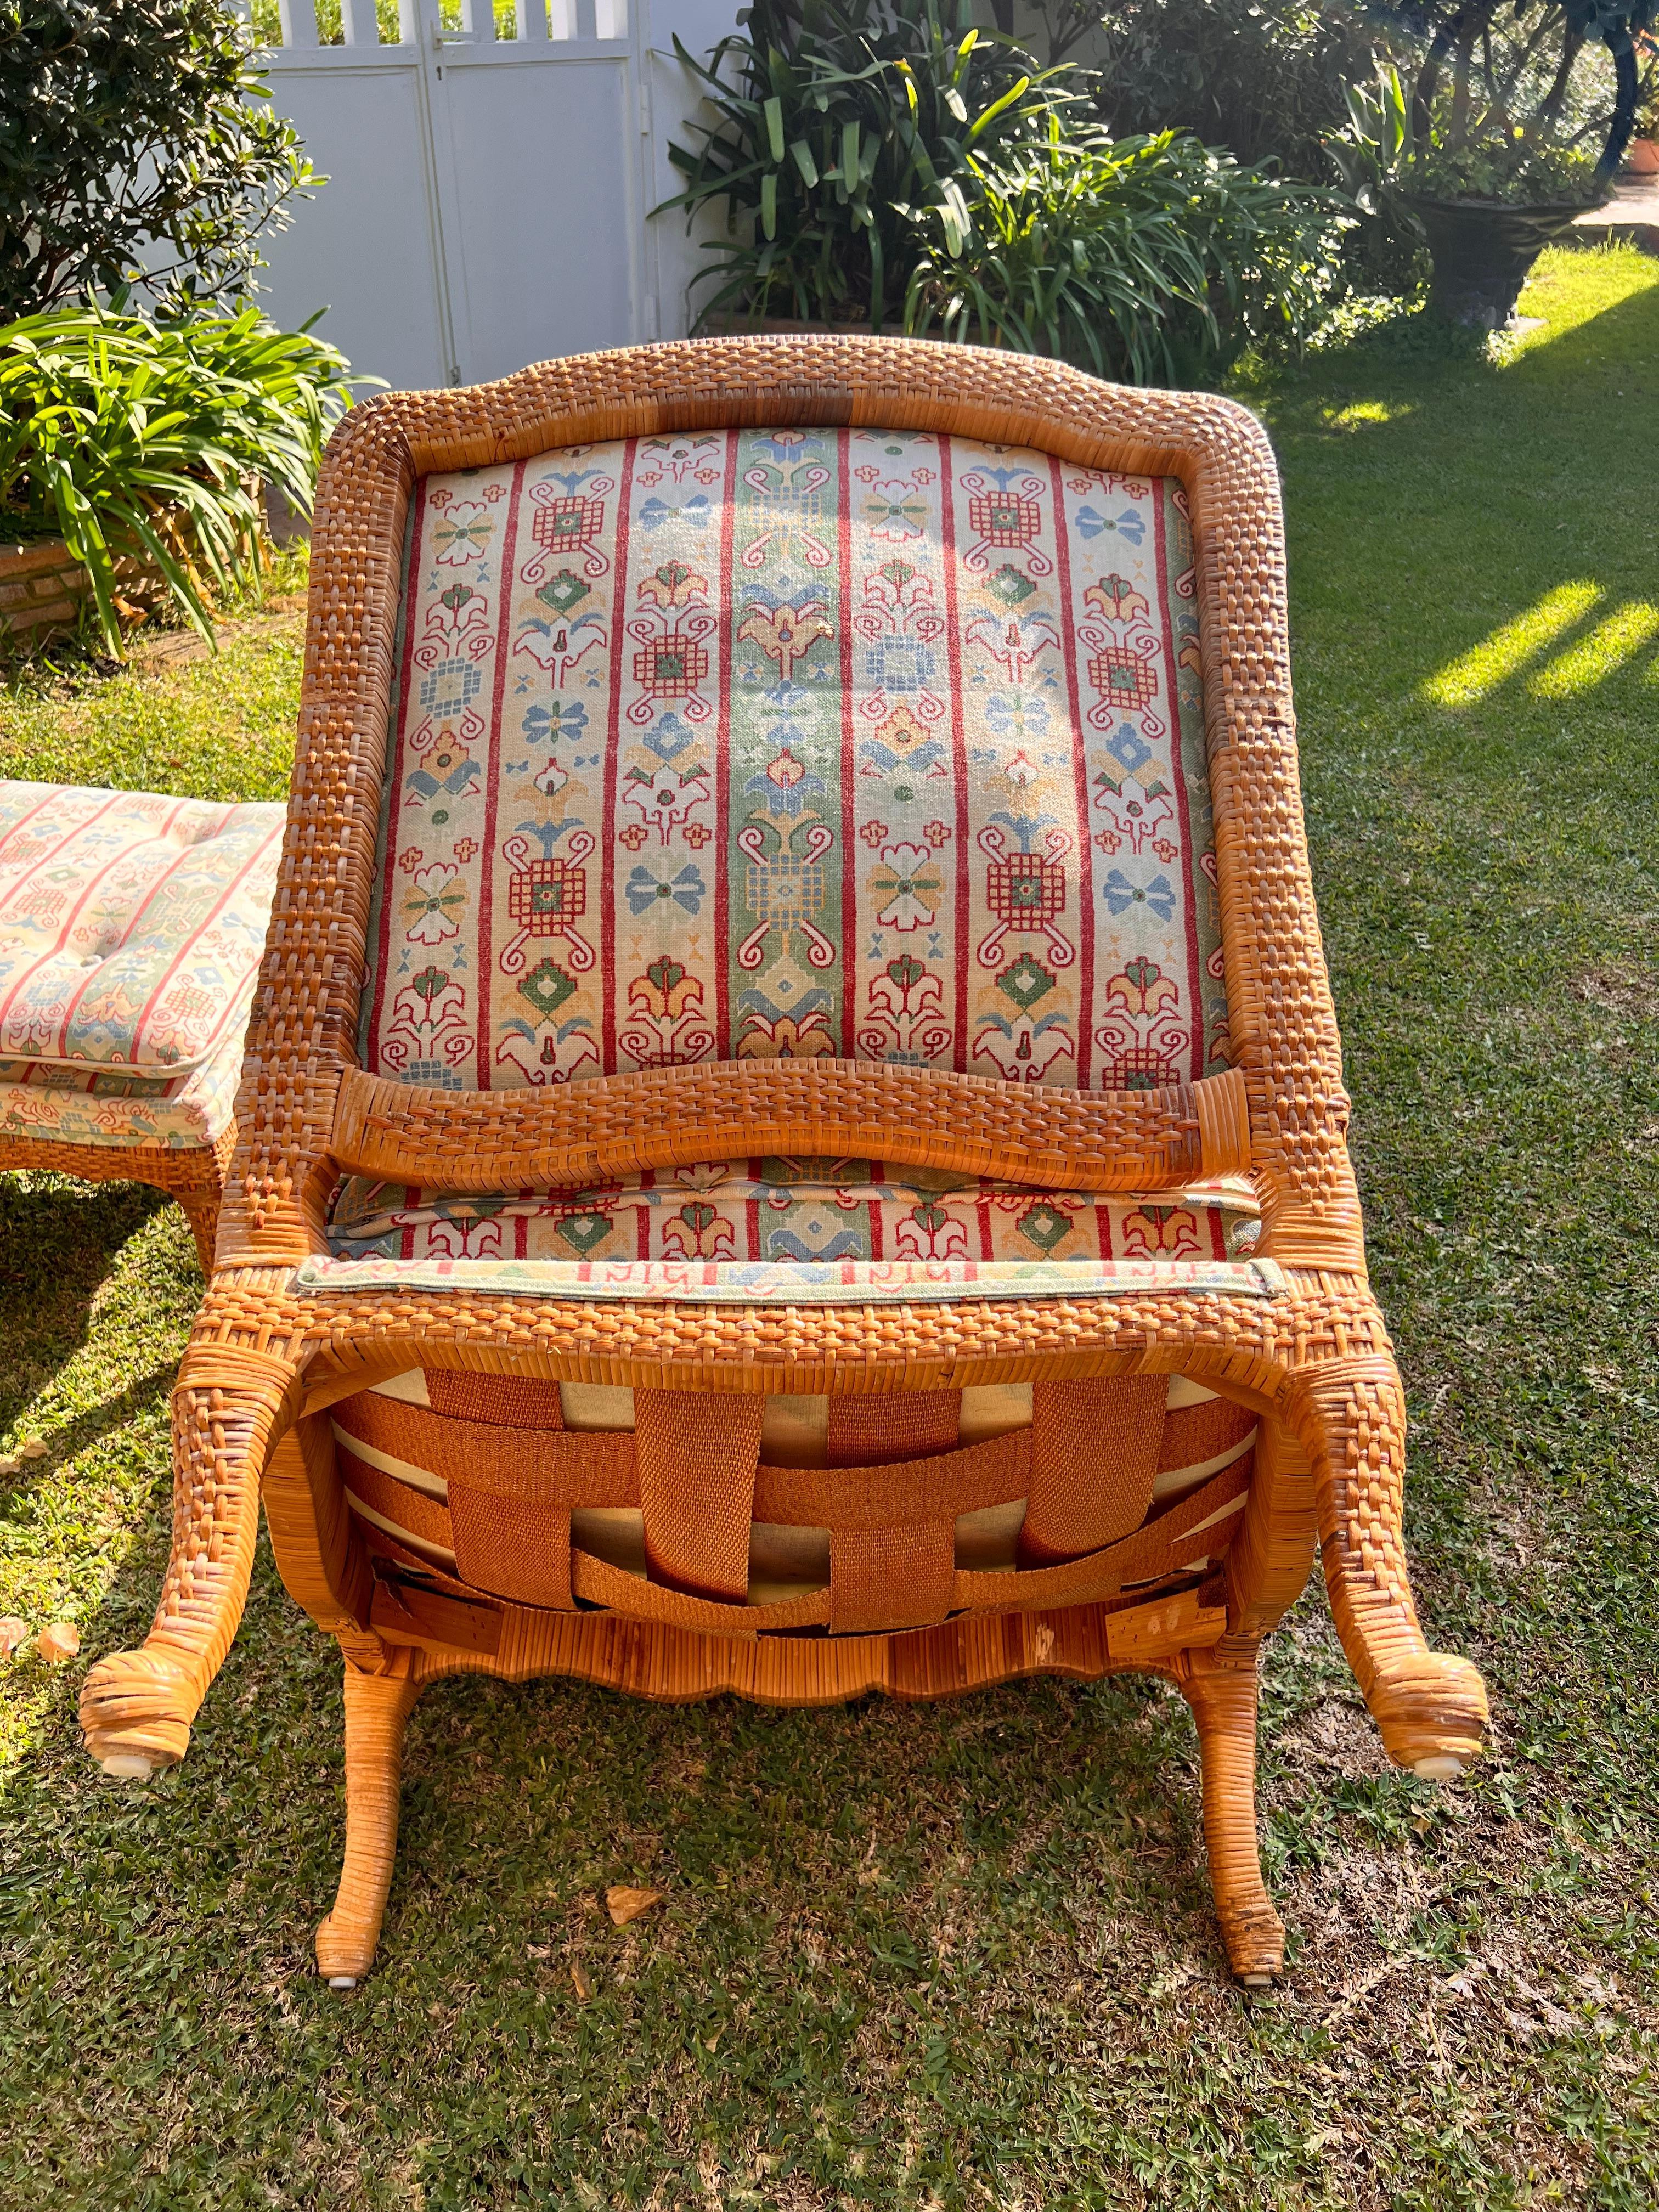  Bergerer Arm Chairs with Matching Puffs hand woven ratan wicker cane  For Sale 4